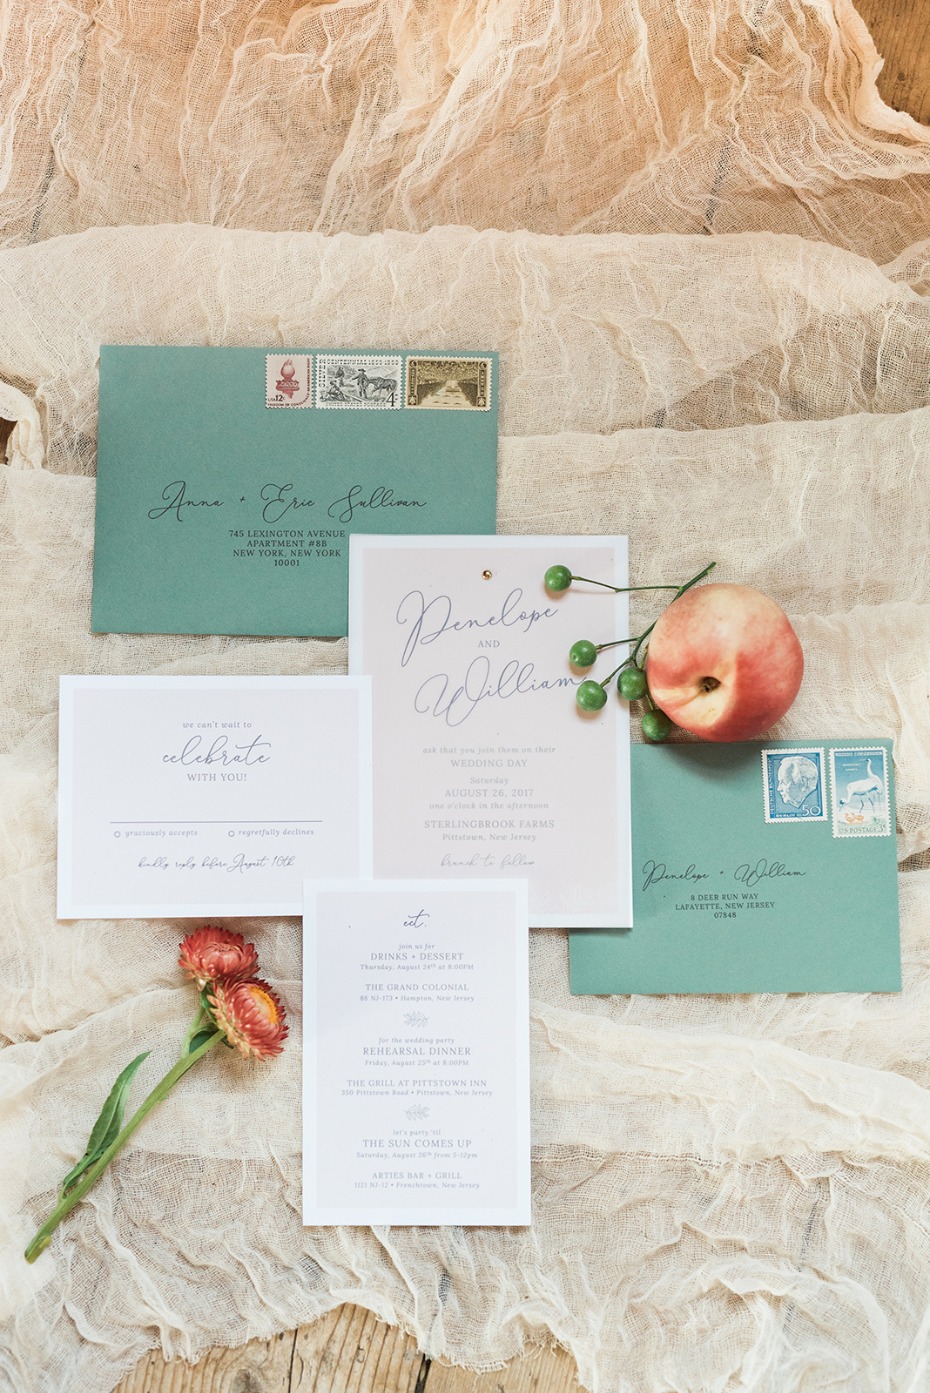 soft and simple wedding invitation suite